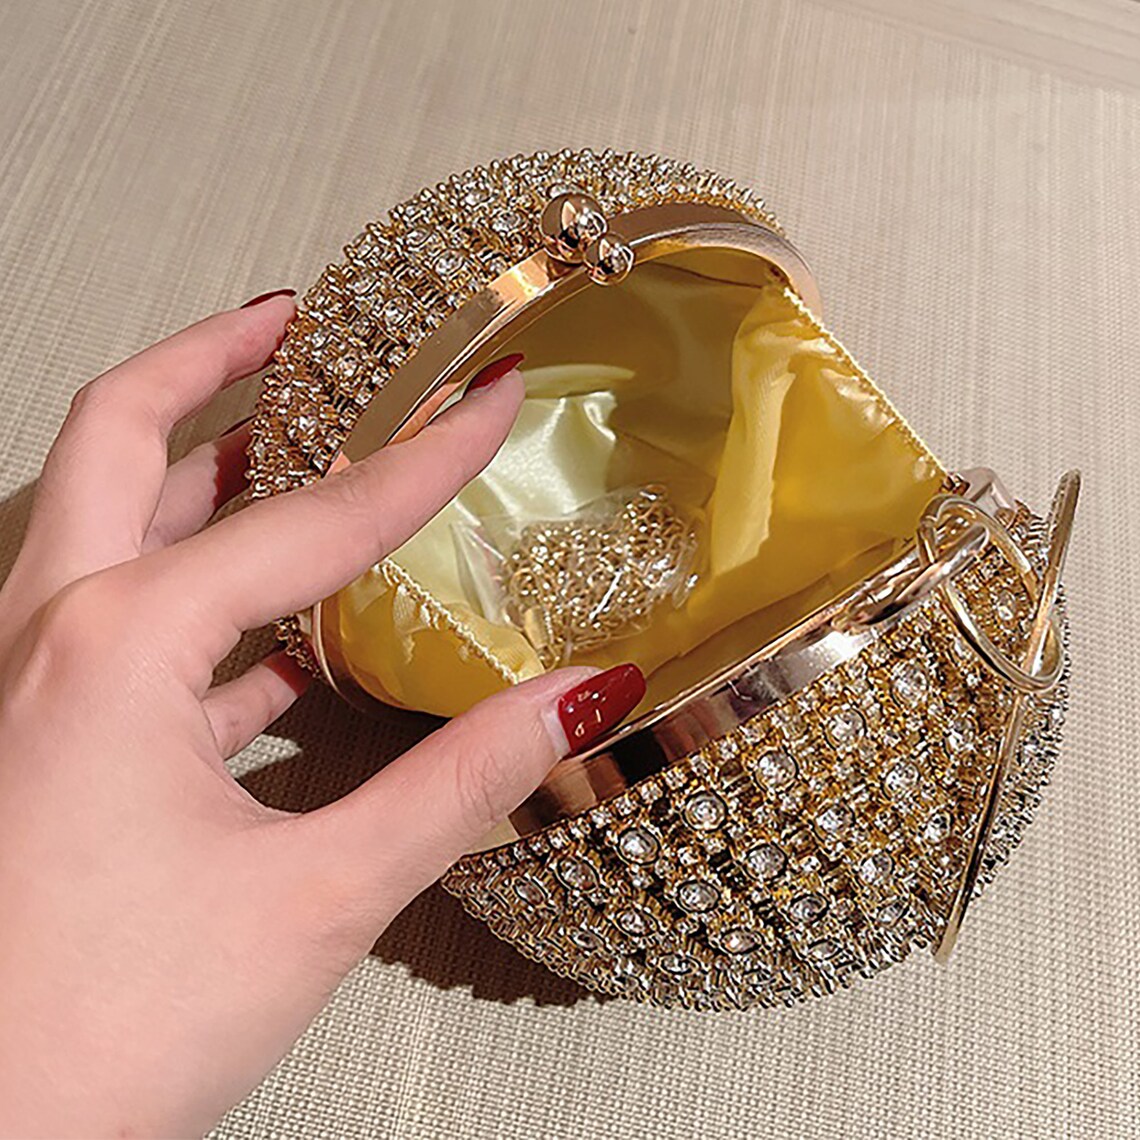 Crystal 3D Clutch with Shoulder Chain